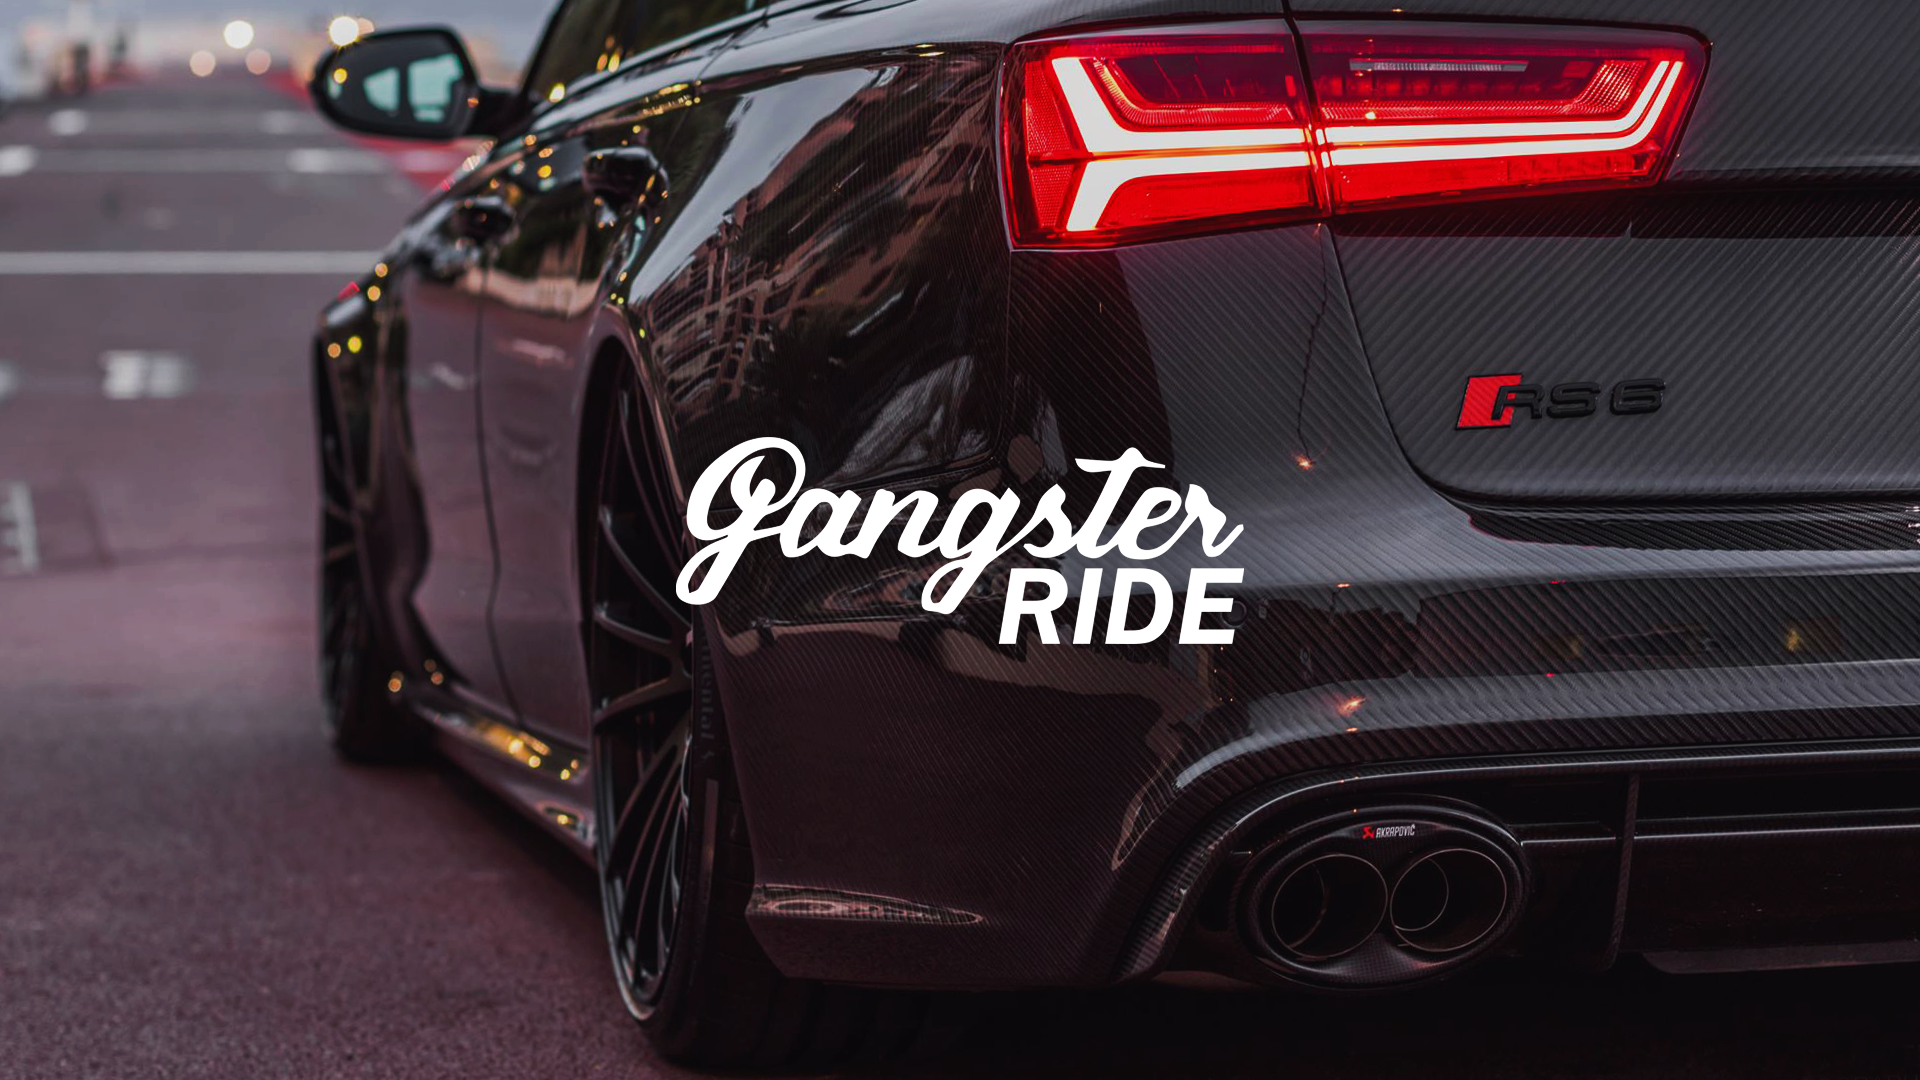 Smoke Smoking Police Lowrider BMX Mask Car Gangsters Gangster Colorful YouTube Audi RS6 Avant Audi 1920x1080